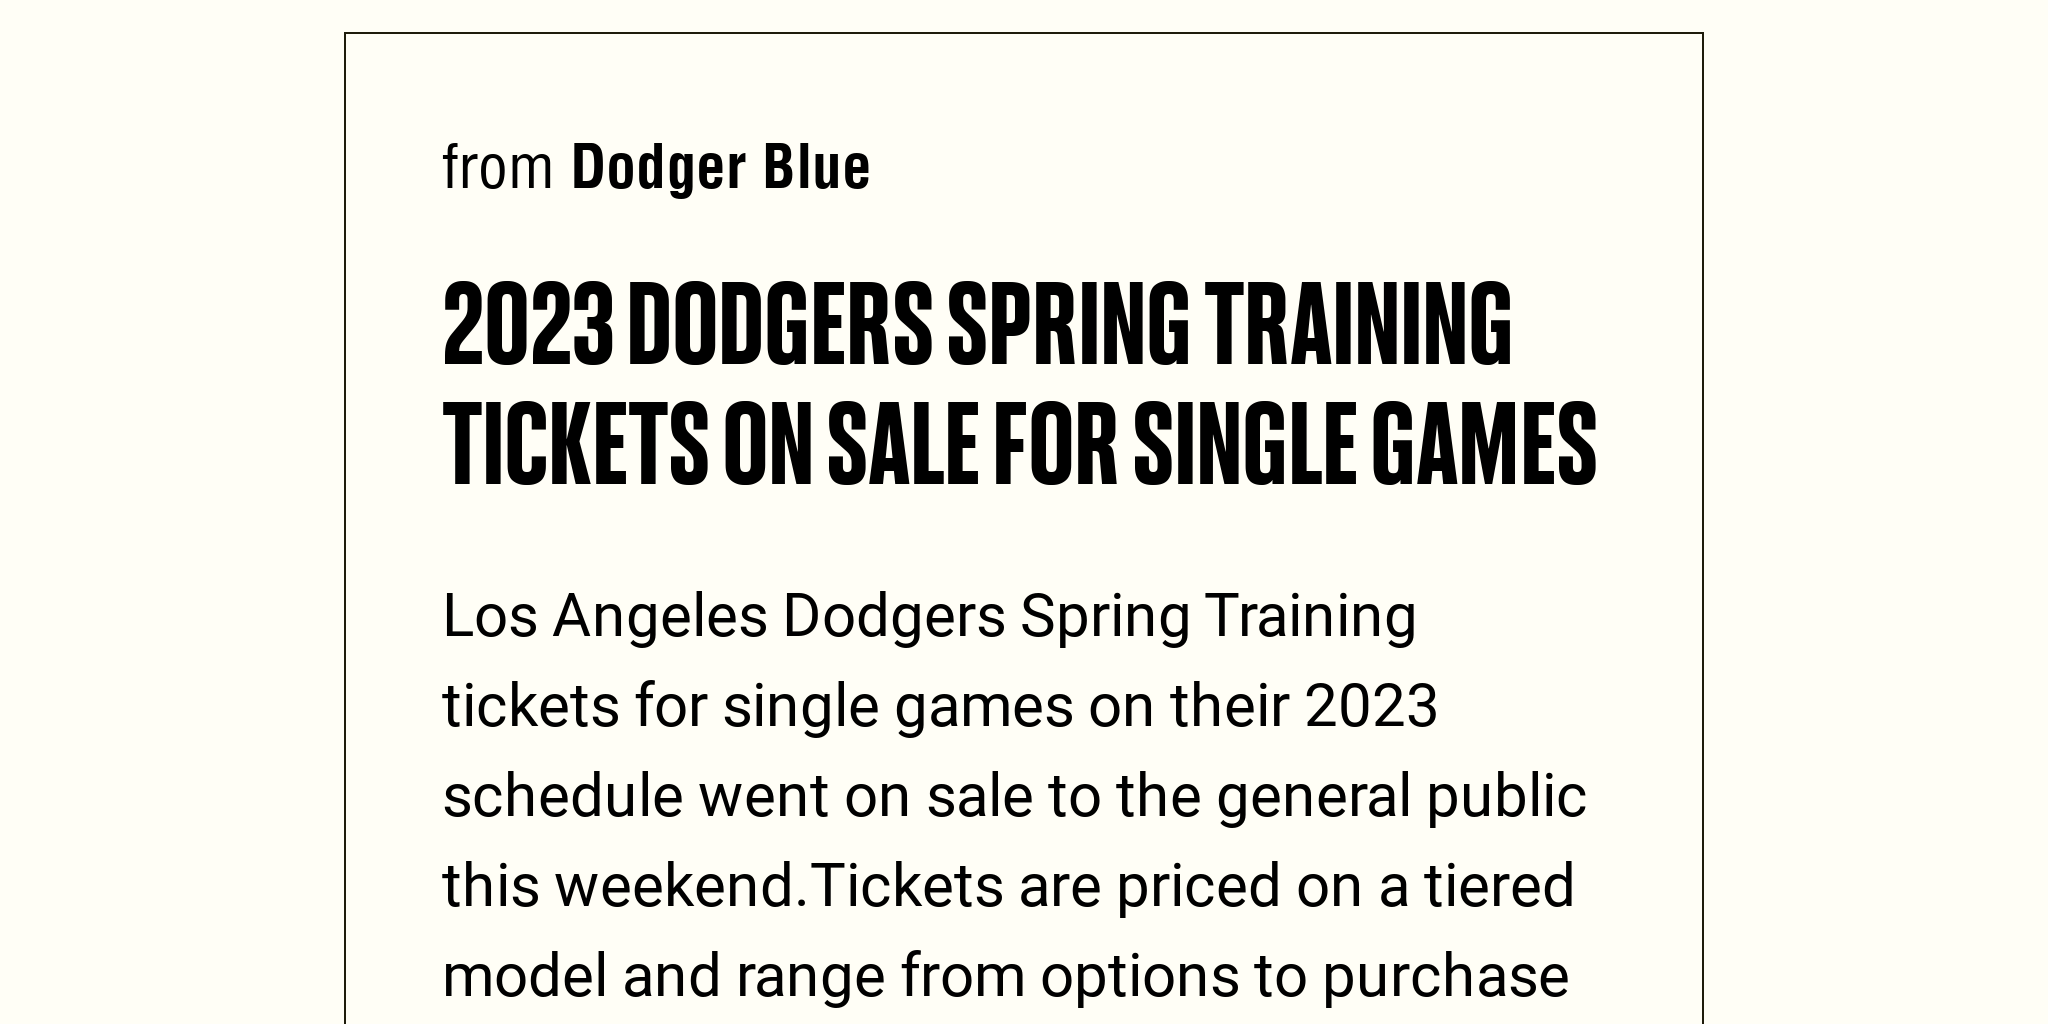 2023 Dodgers Spring Training Tickets On Sale For Single Games Briefly